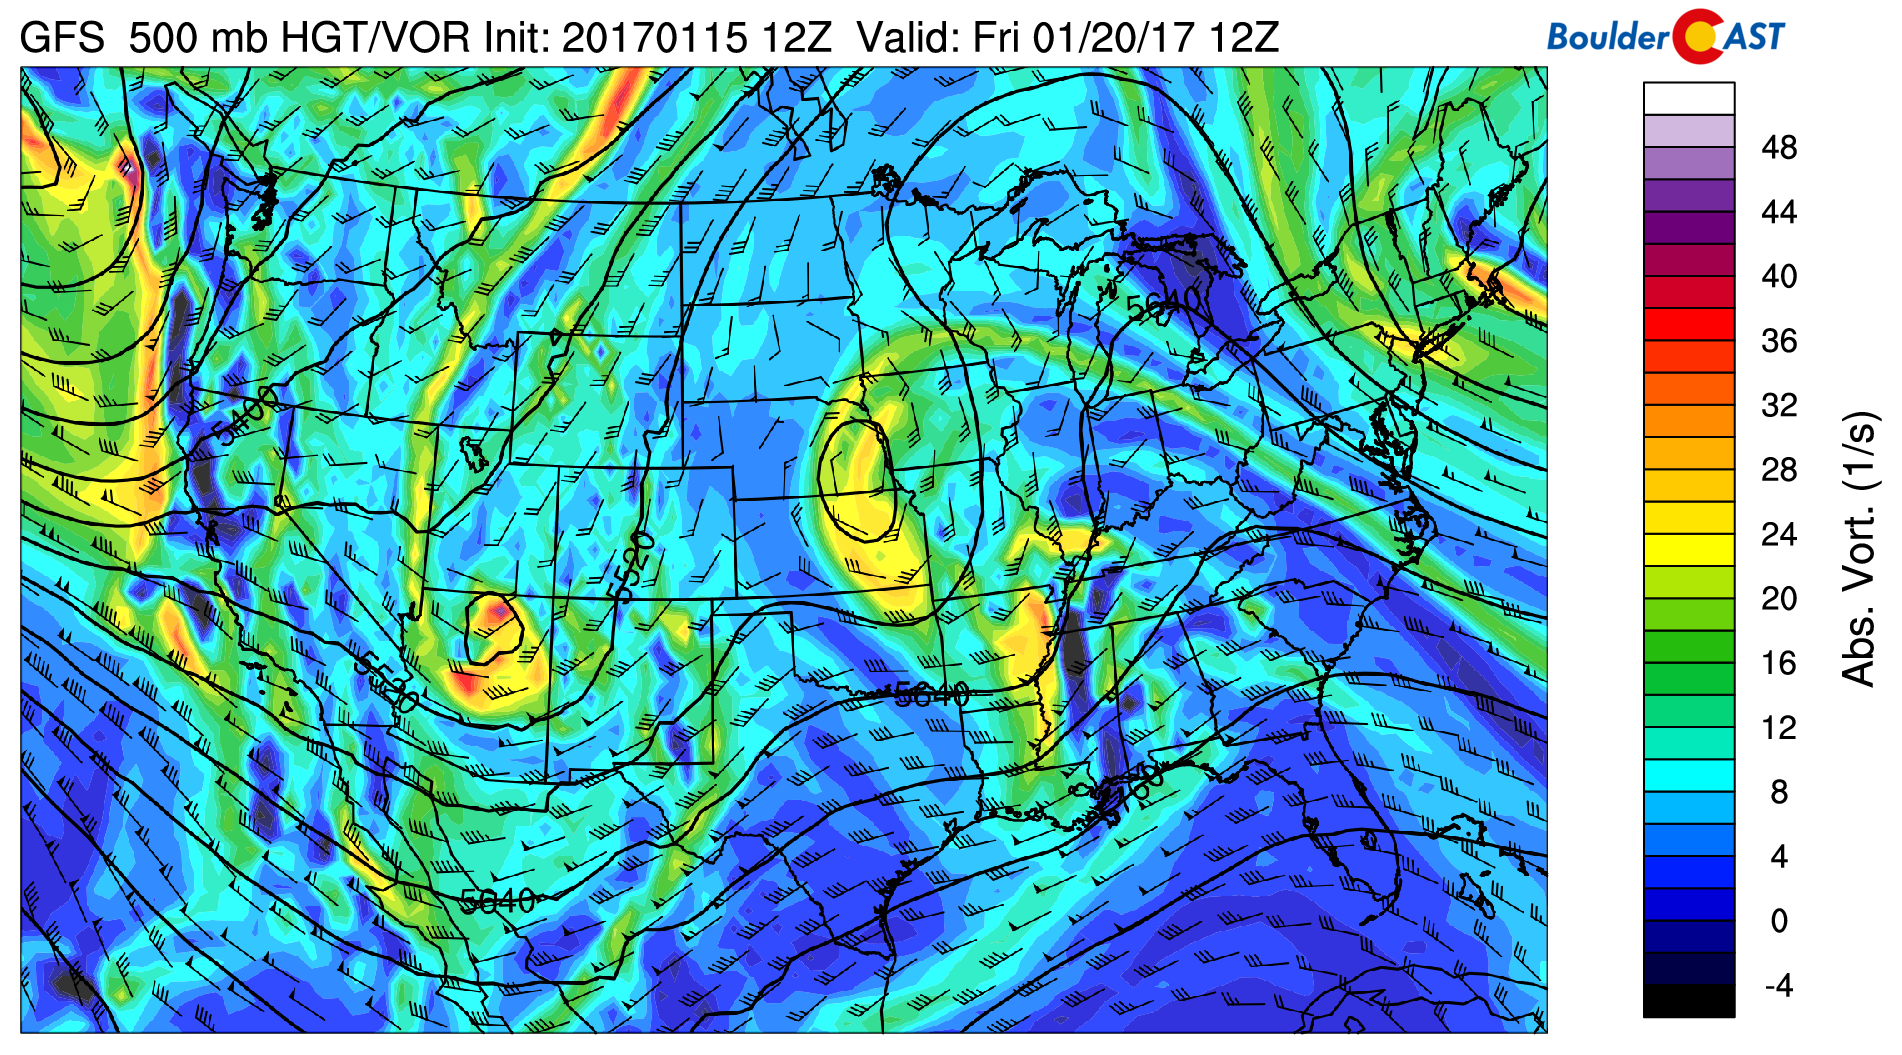 GFS mid-level 500 mb flow for Friday